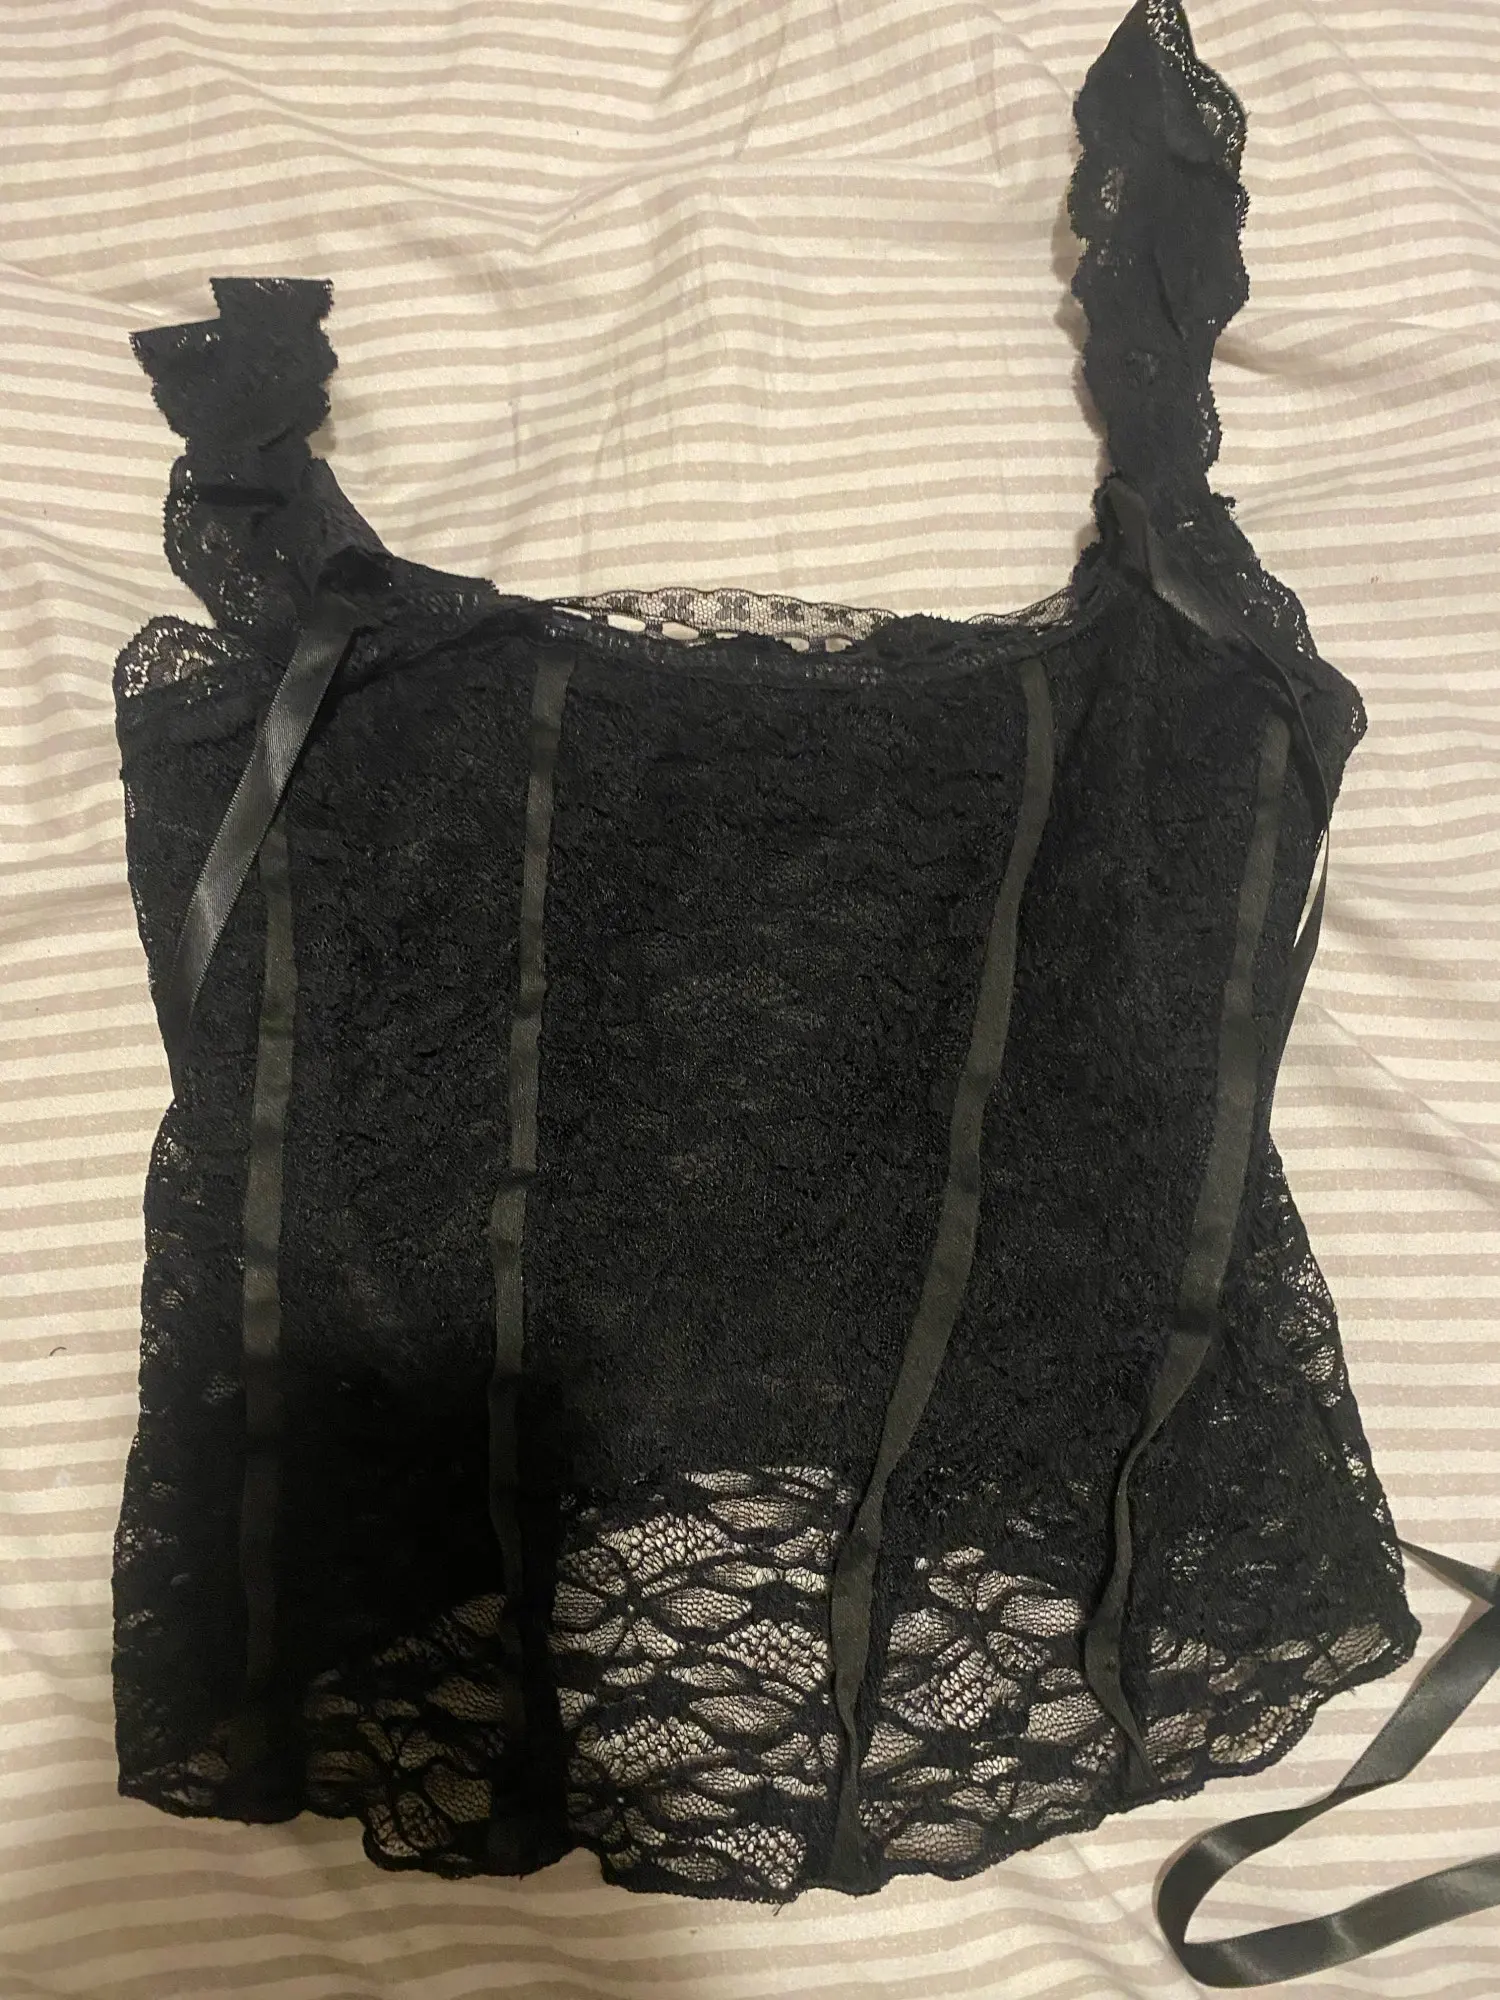 Light Mesh Camisole Top Corset photo review